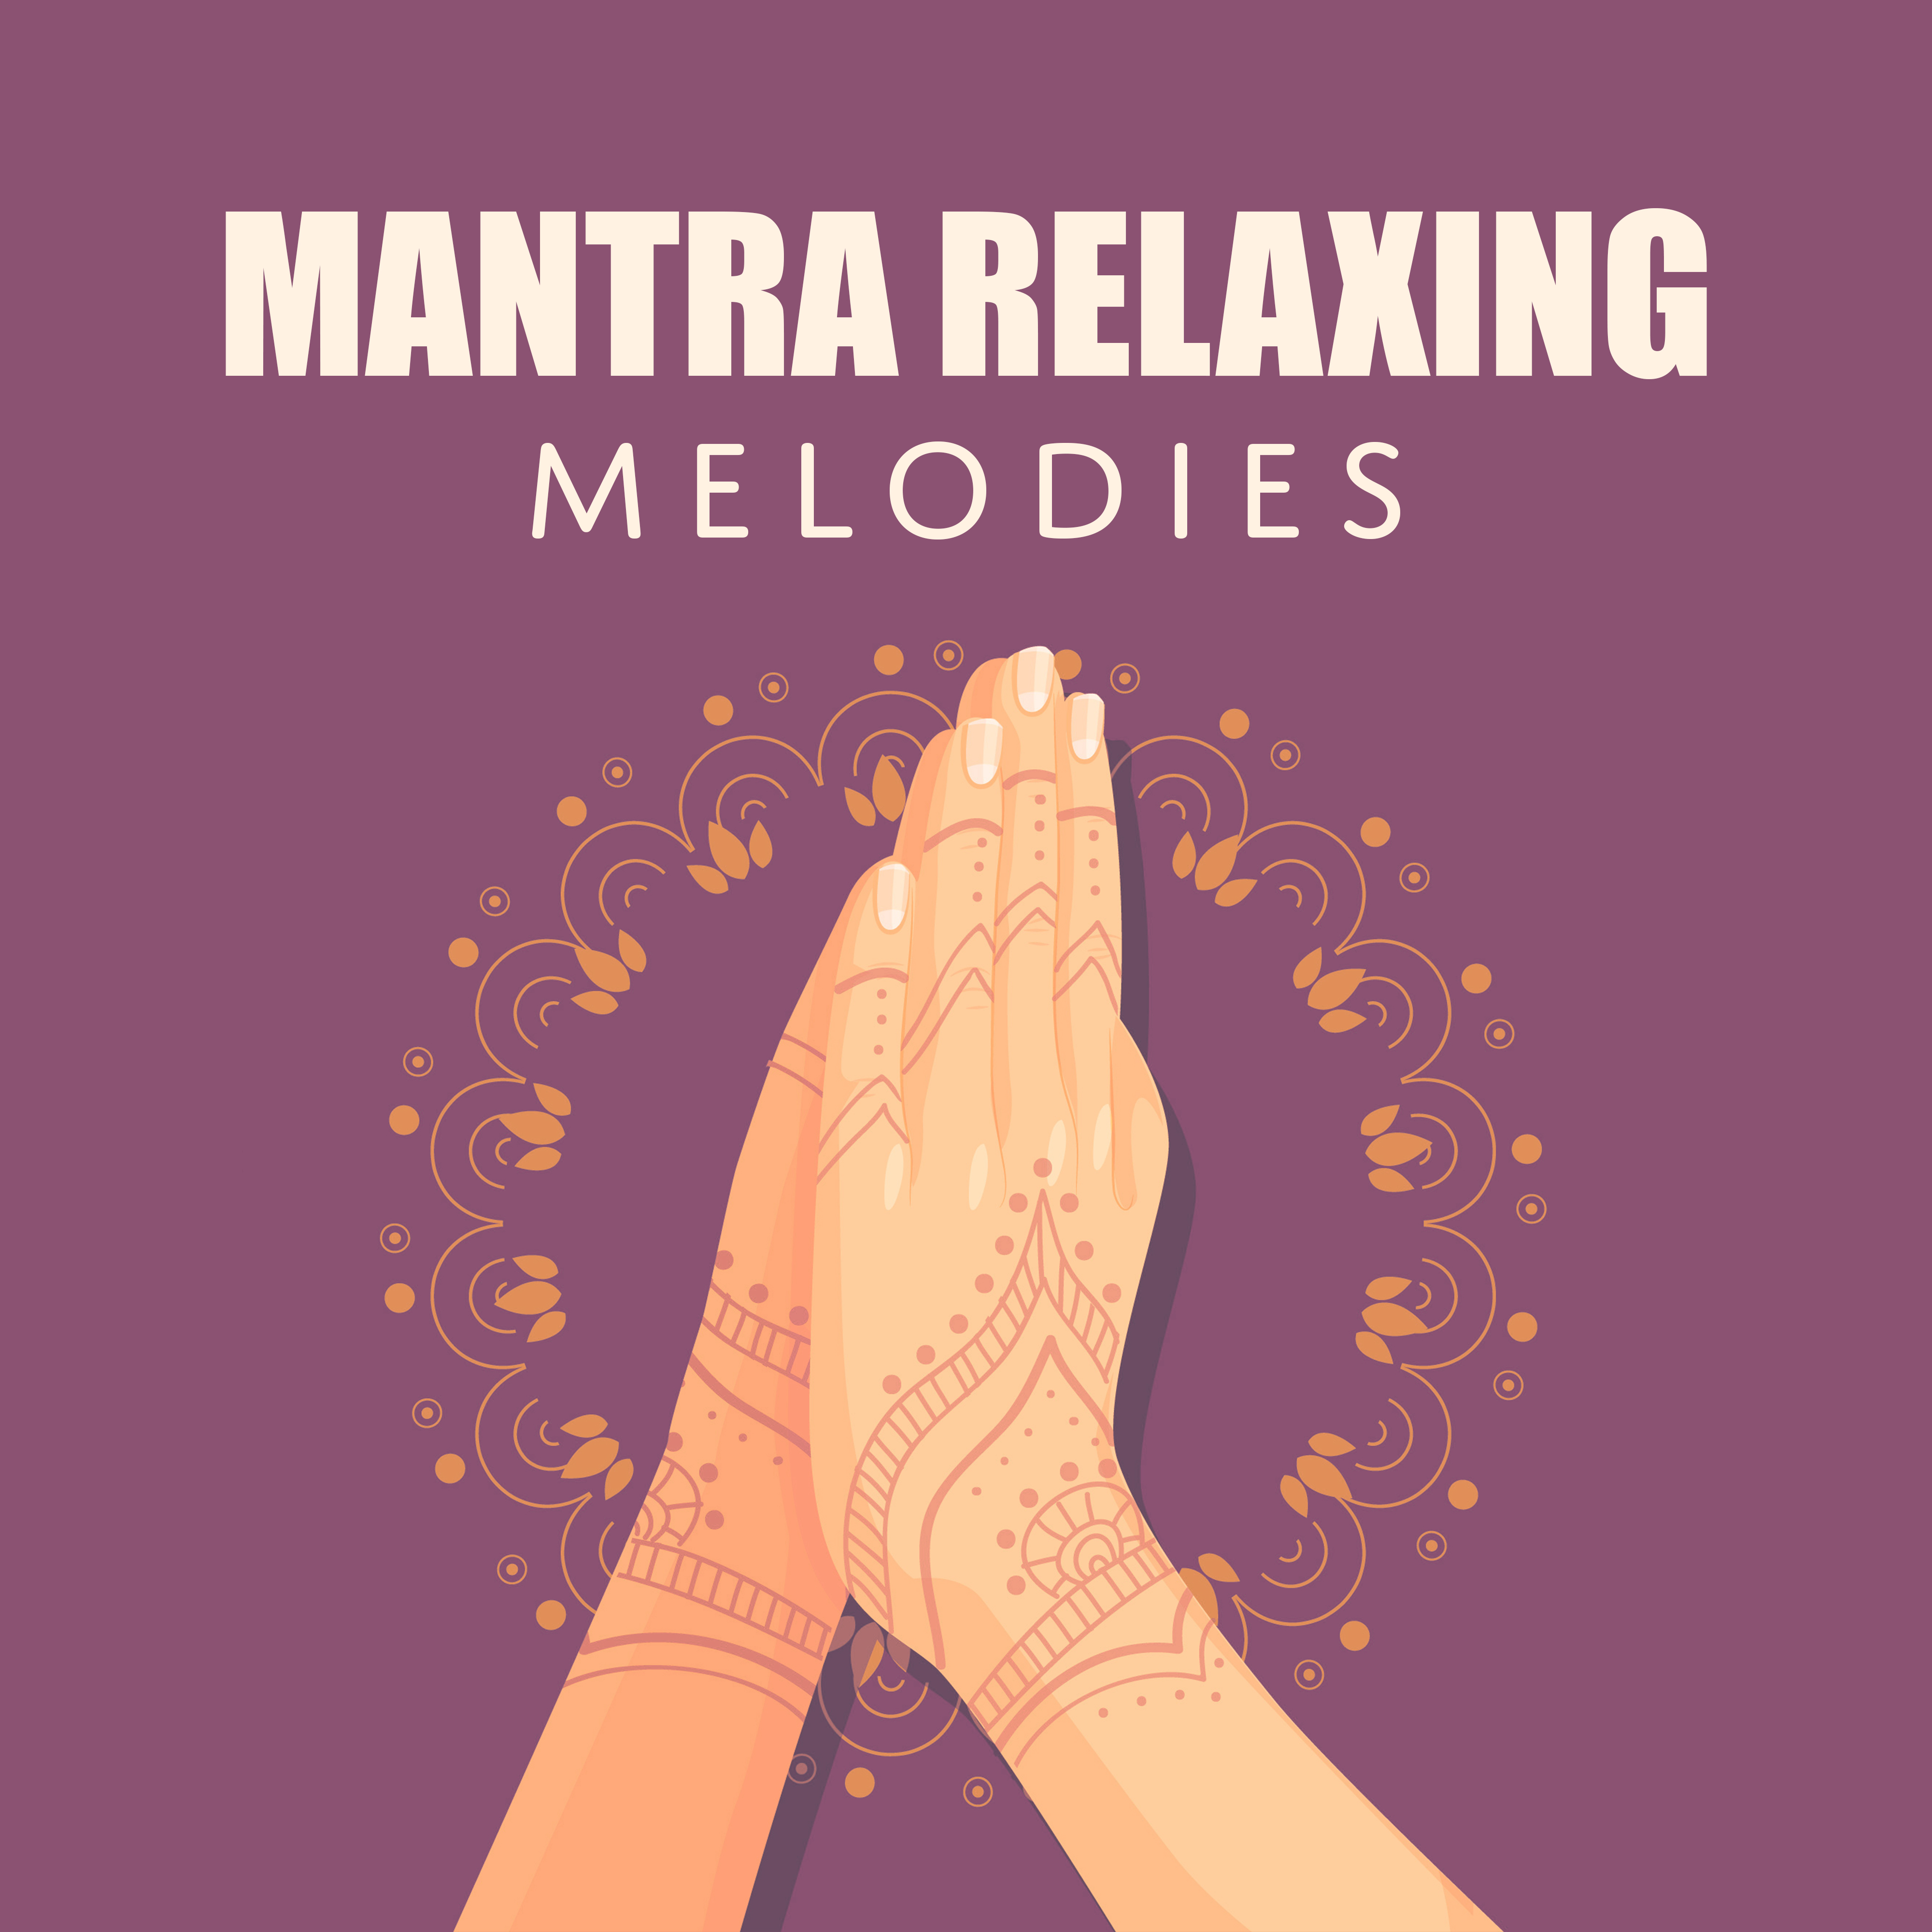 Mantra Relaxing Melodies